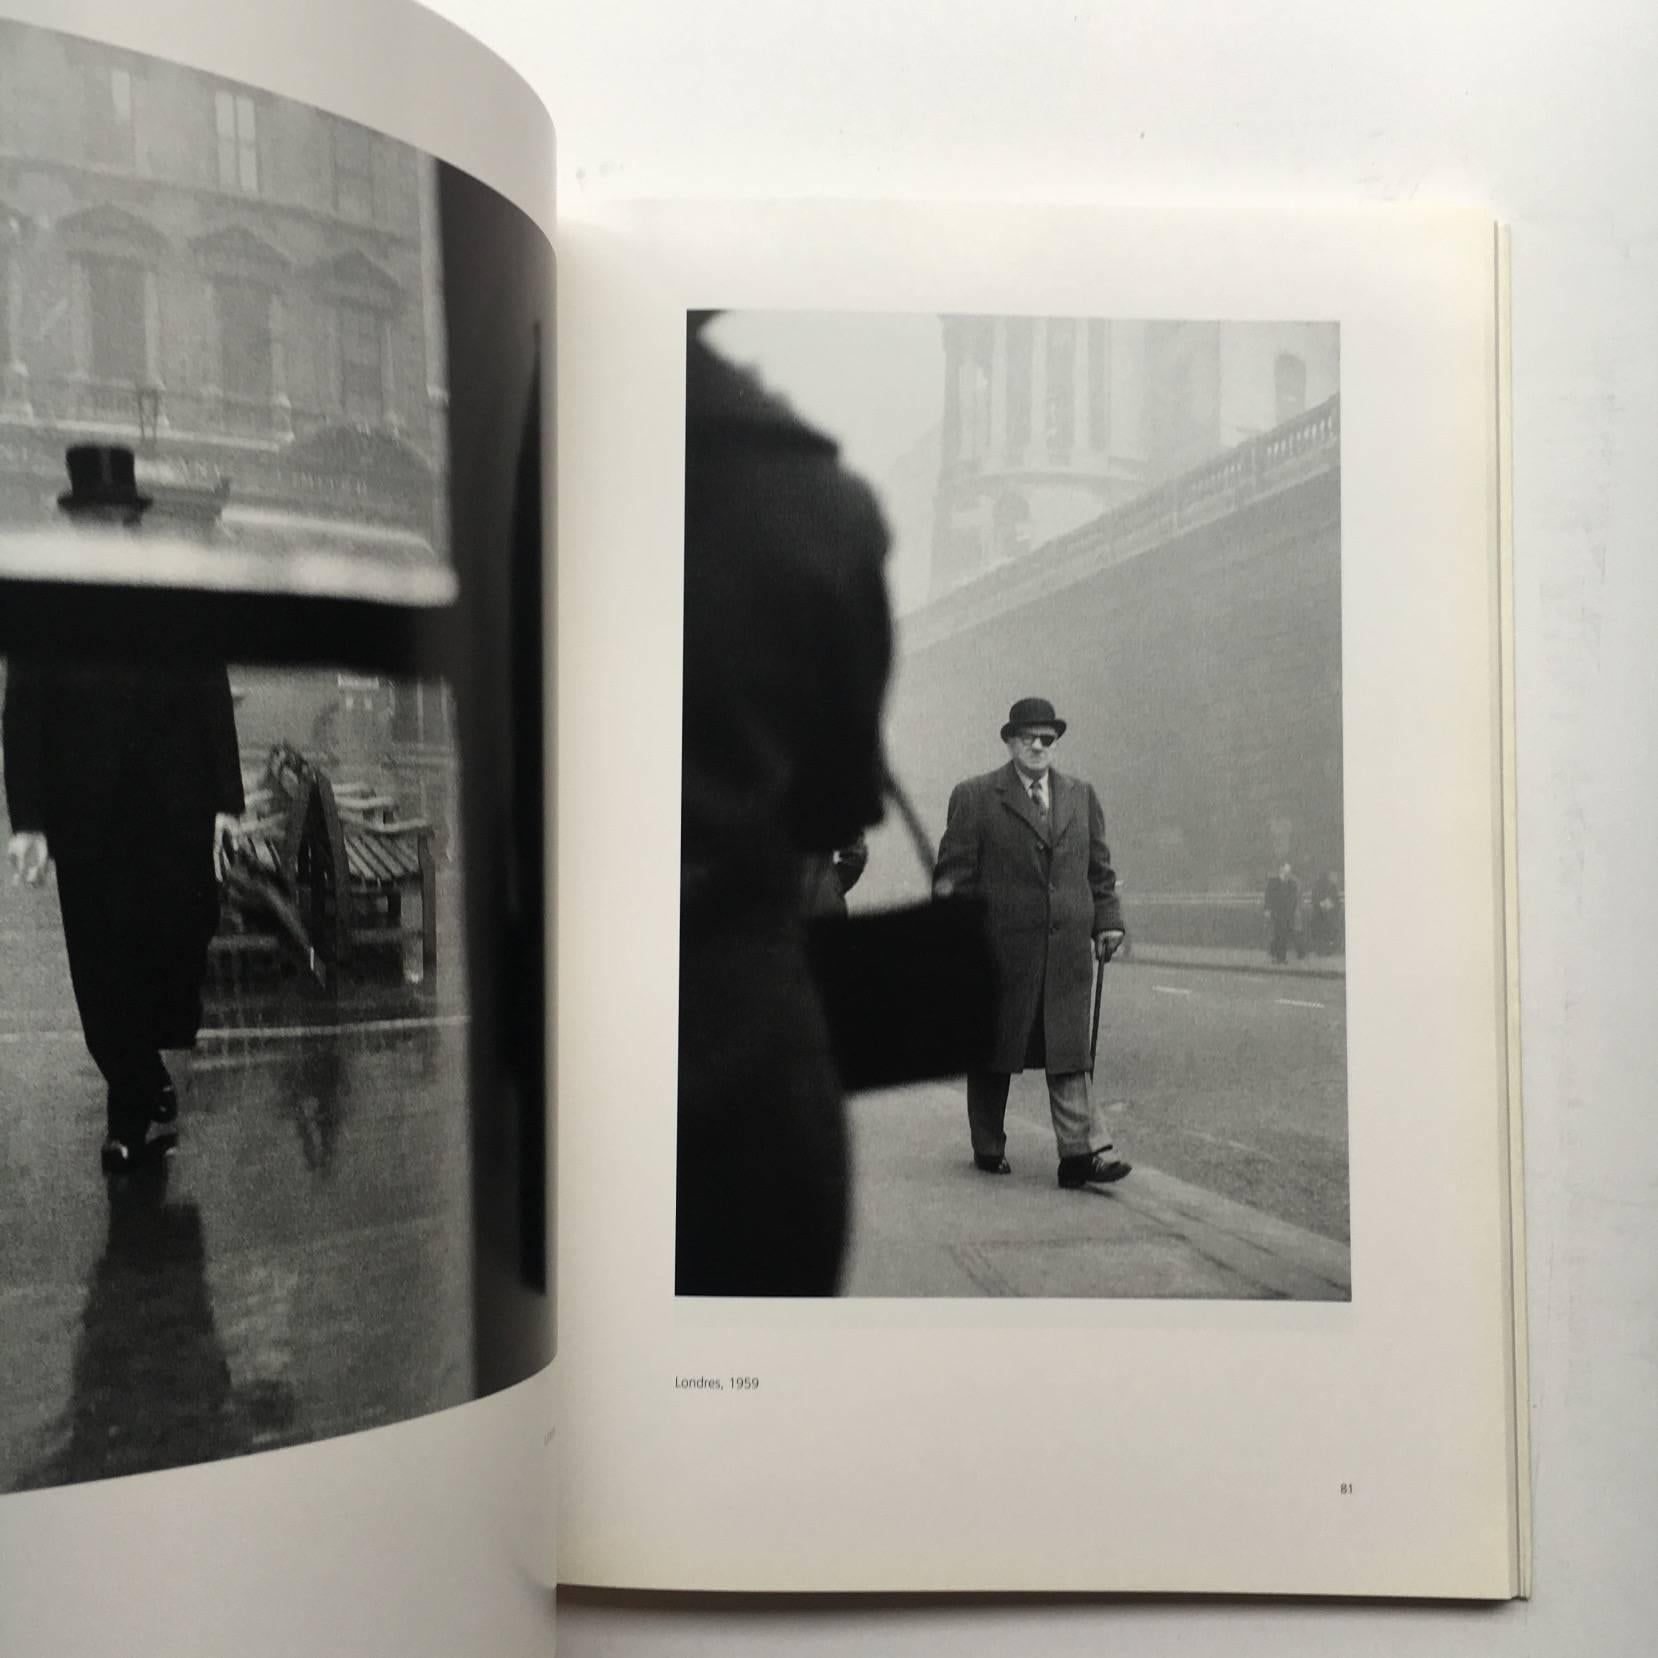 First edition, published by Generalitat Valenciana, 1999.

An outstanding cover for an outstanding book, this publication was produced for an exhibition of Larrain’s work at the IVAM Centre Julio Gonzales in 1999. Sergio Larrain, often cited as the